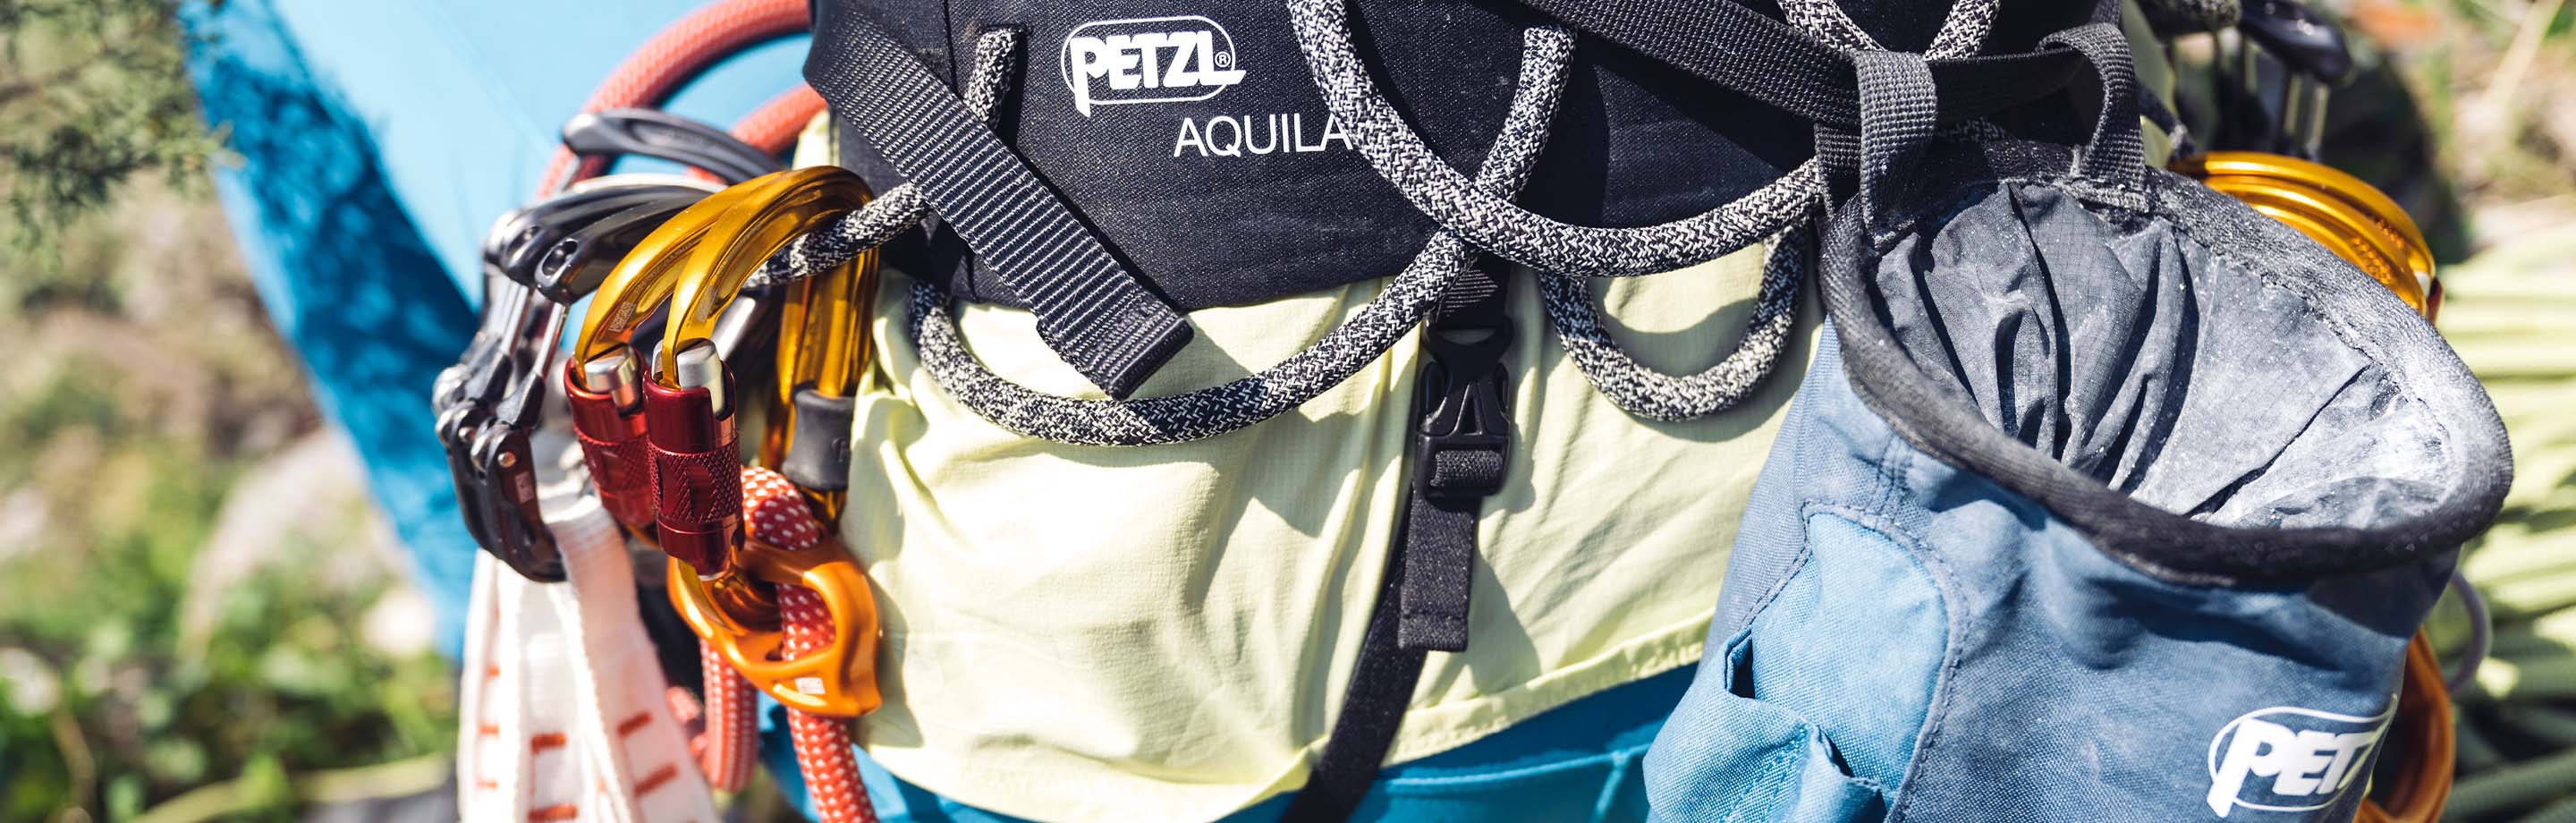 The Petzl Head Torch and Other Climbing Equipment 